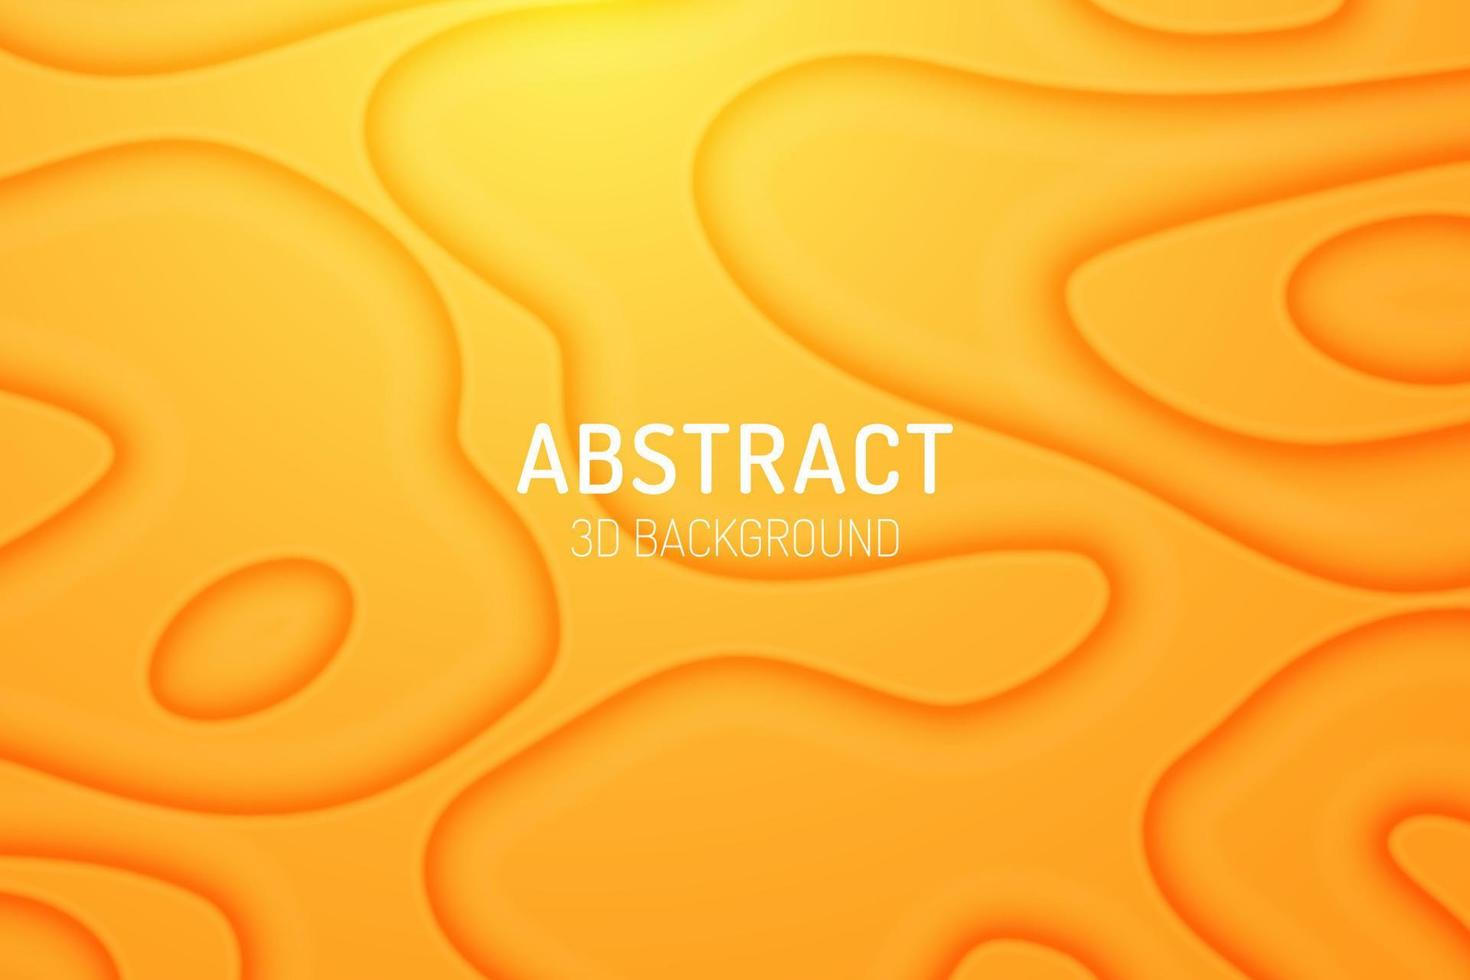 Abstract minimal gradient 3d background vector